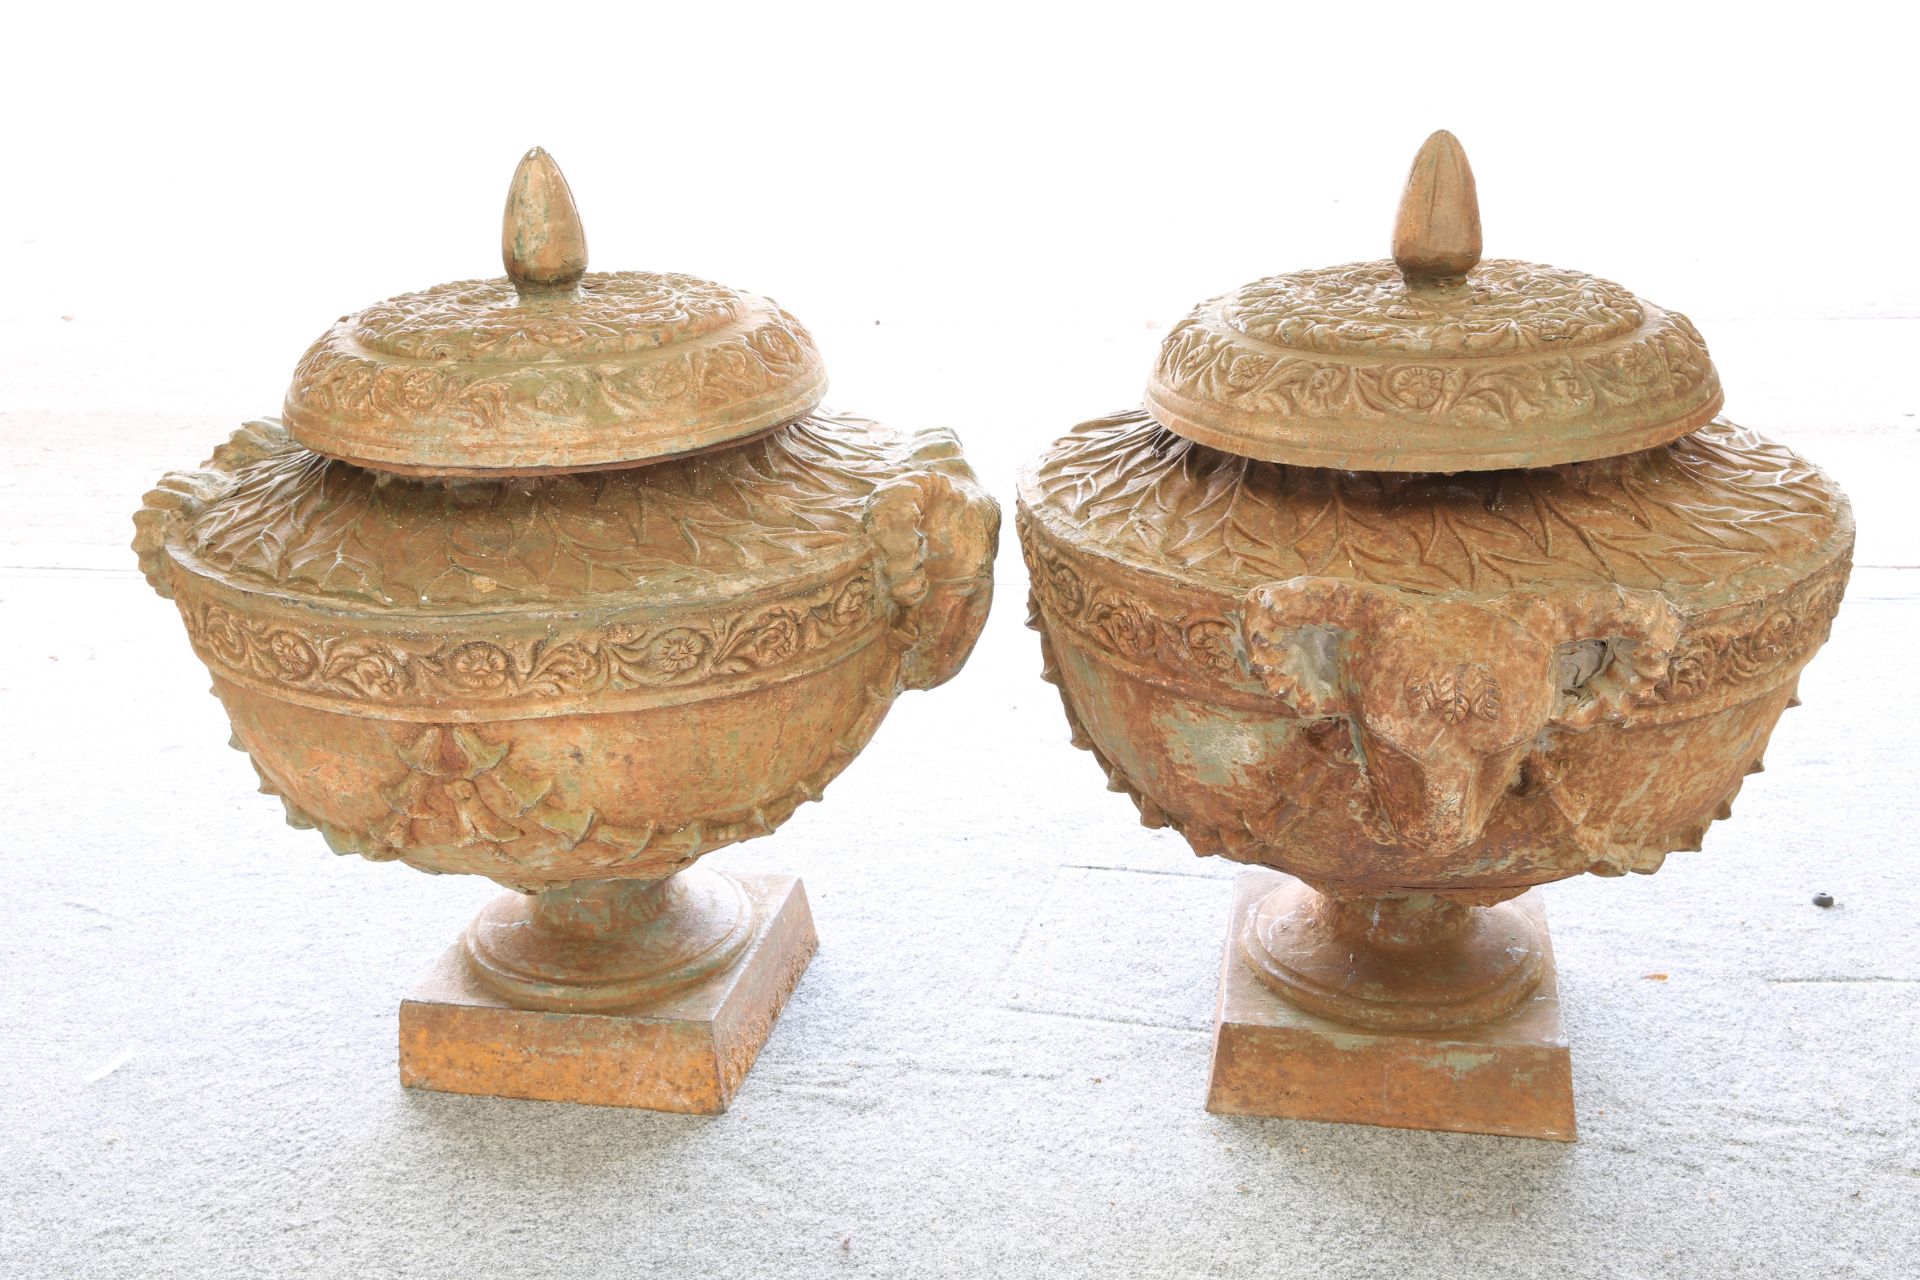 A LARGE AND IMPRESSIVE PAIR OF CAST IRON FLOWER POTS AND COVERS